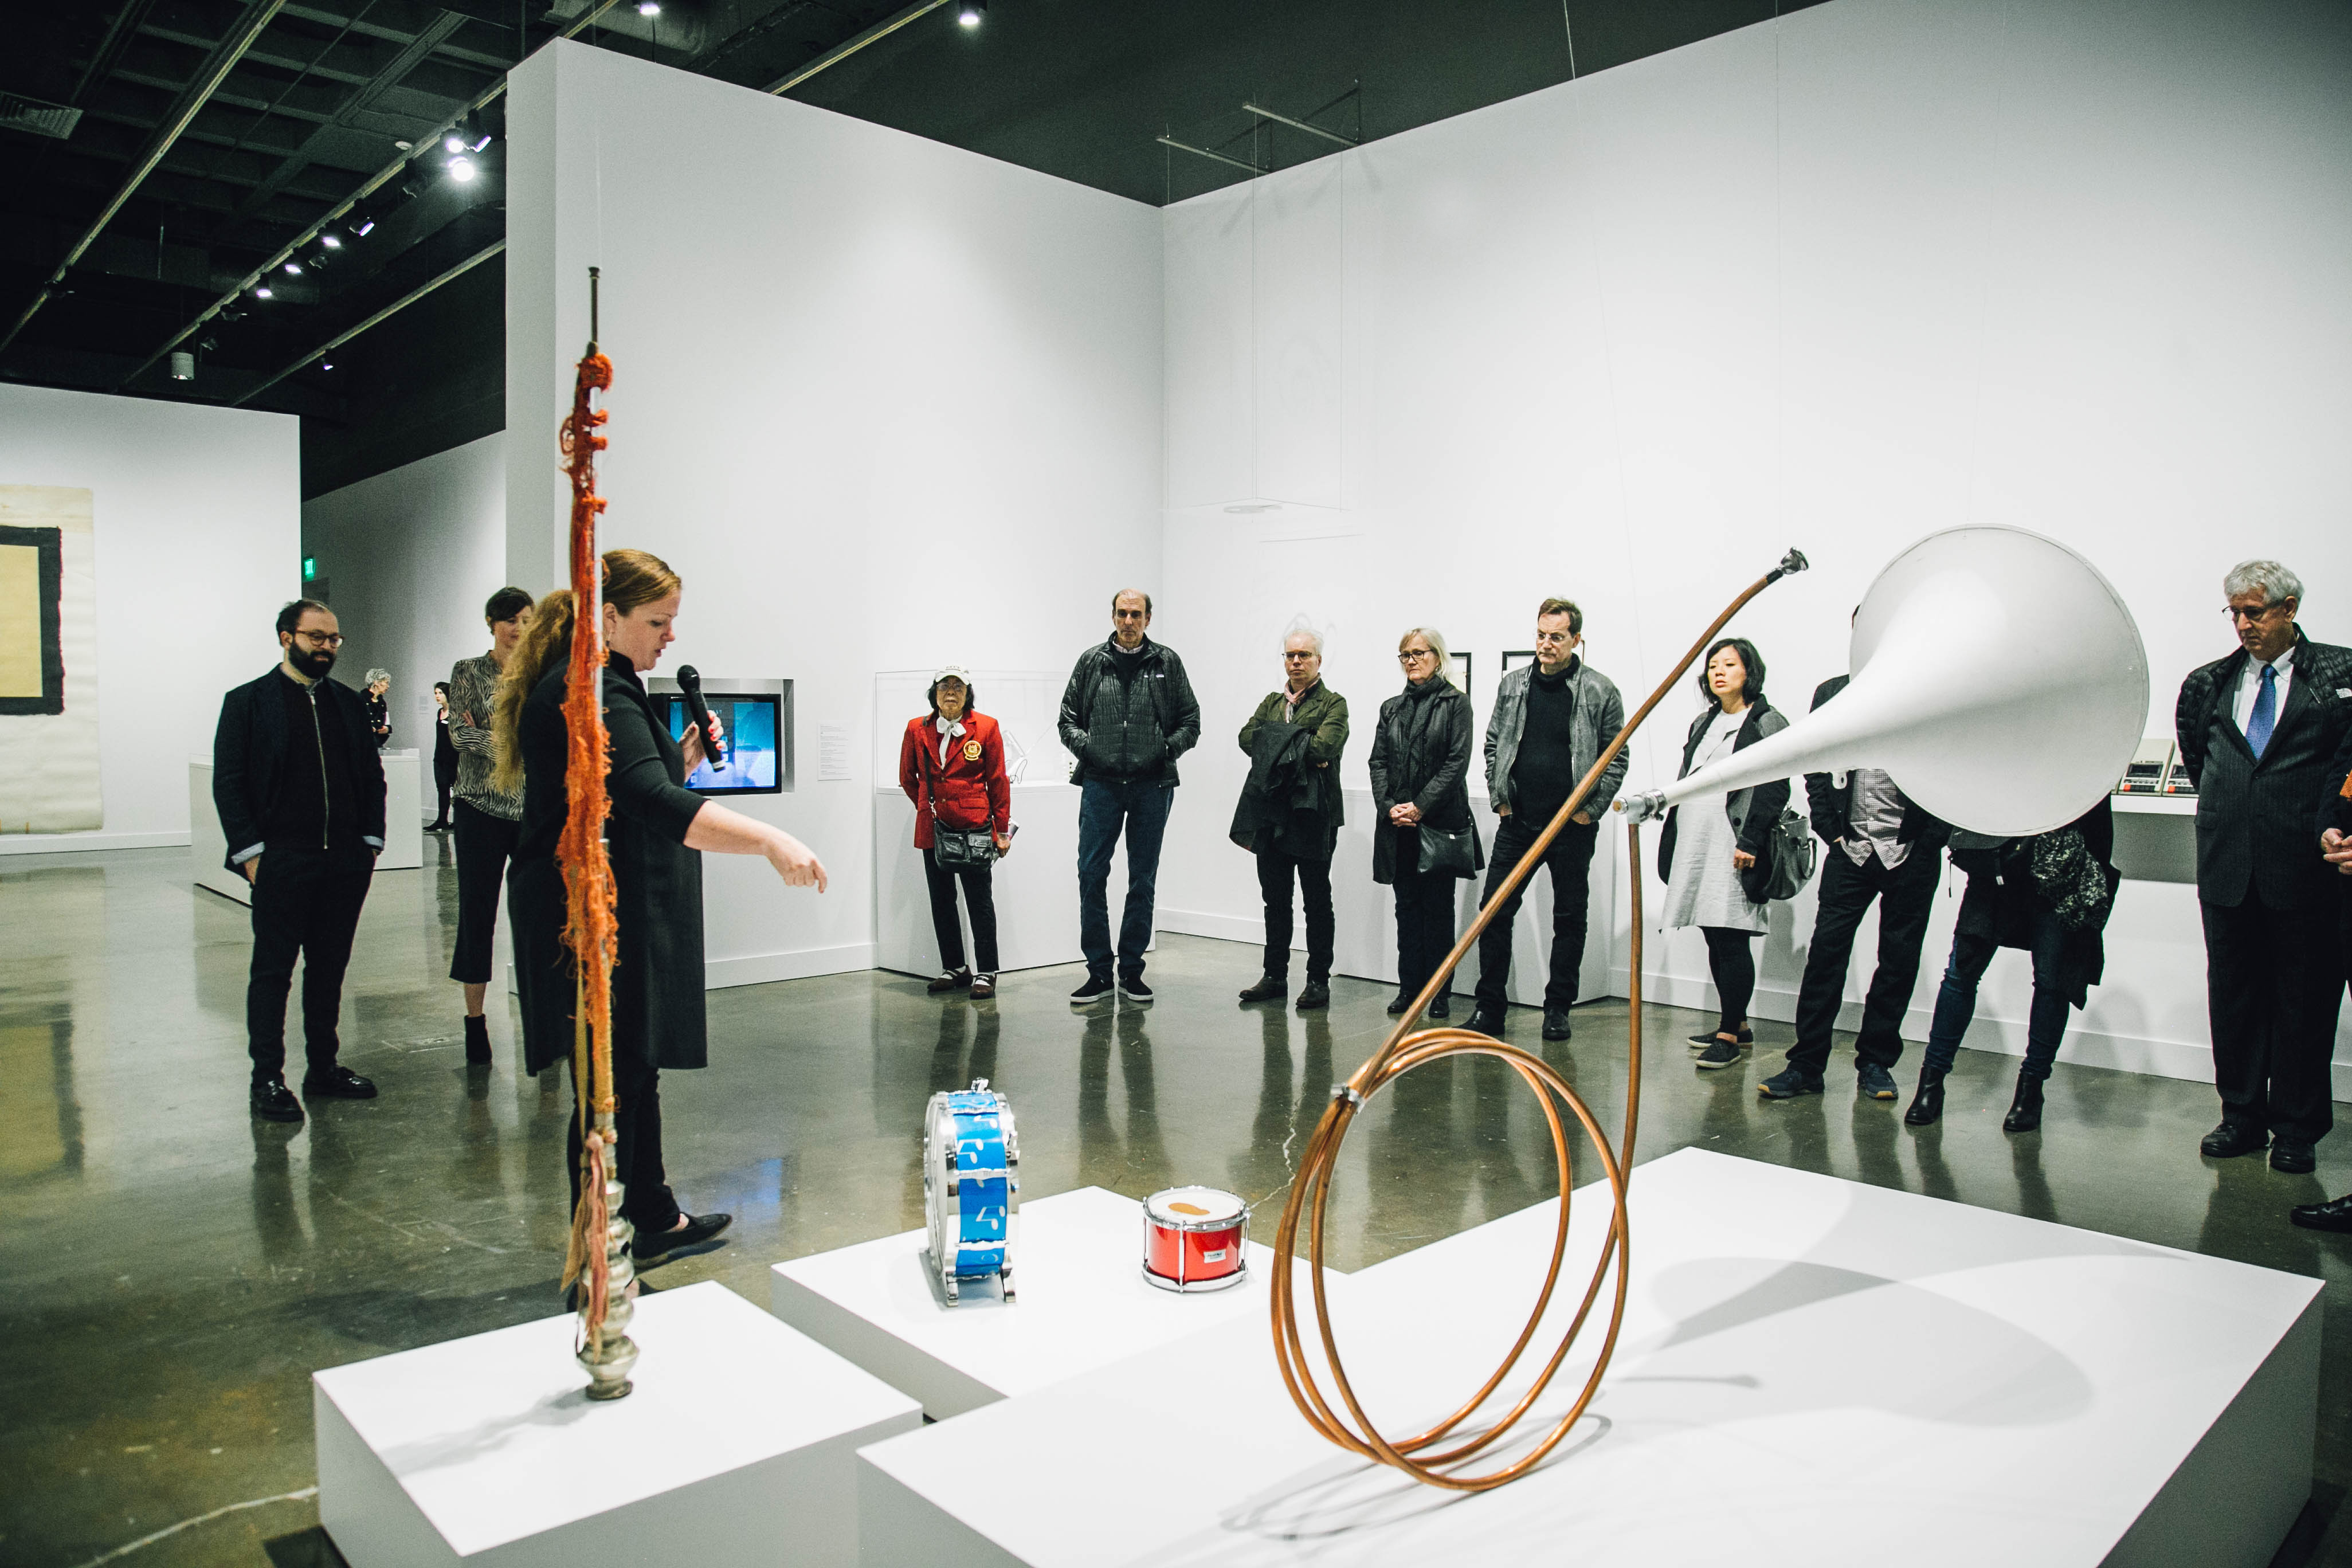 A gallery guide points to sculptures by Tony Conrad and engage a group of gallery visitors.